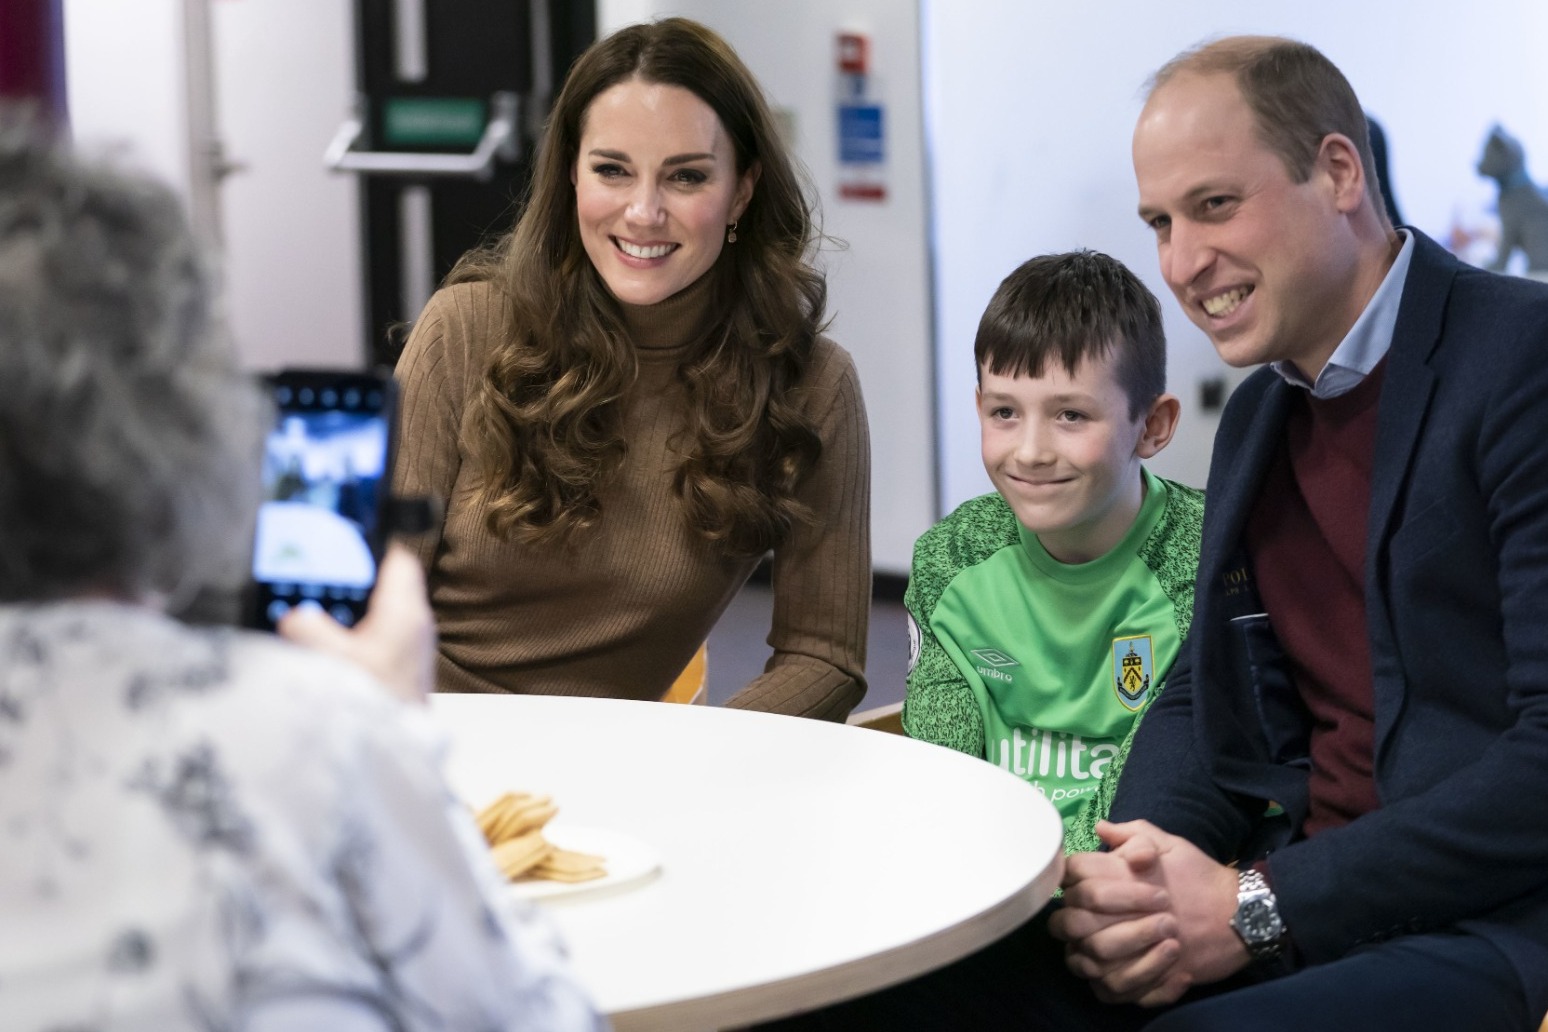 William comforts grieving boy who lost his mother, saying ‘it gets easier’ 